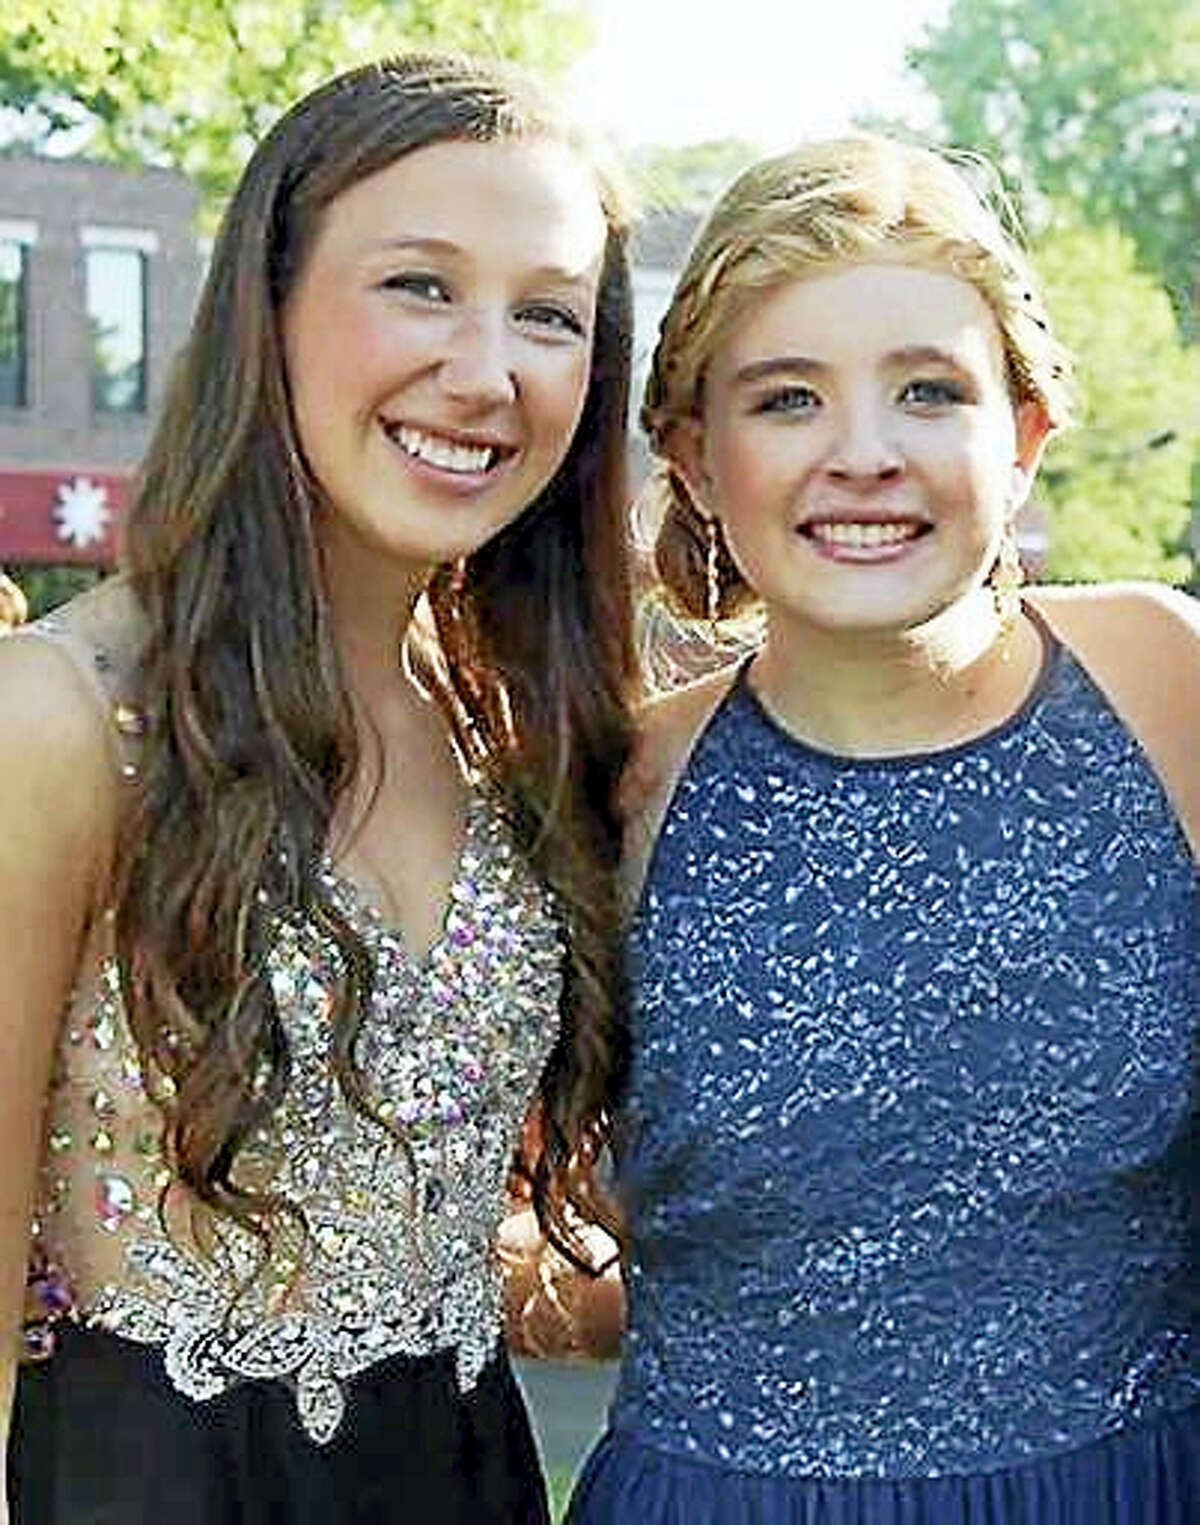 In this May 29, 2015 photo provided by Bonnie Hourican, her daughter Lauren Hourican, left, poses with Catherine Malatesta before the junior prom at Arlington High School in Arlington, Mass. After Catherine died from a rare cancer on Aug. 2, 2015, some of Catherine’s friends, including Lauren, decided to wear her gown to their own proms in 2016 in Catherine’s honor.